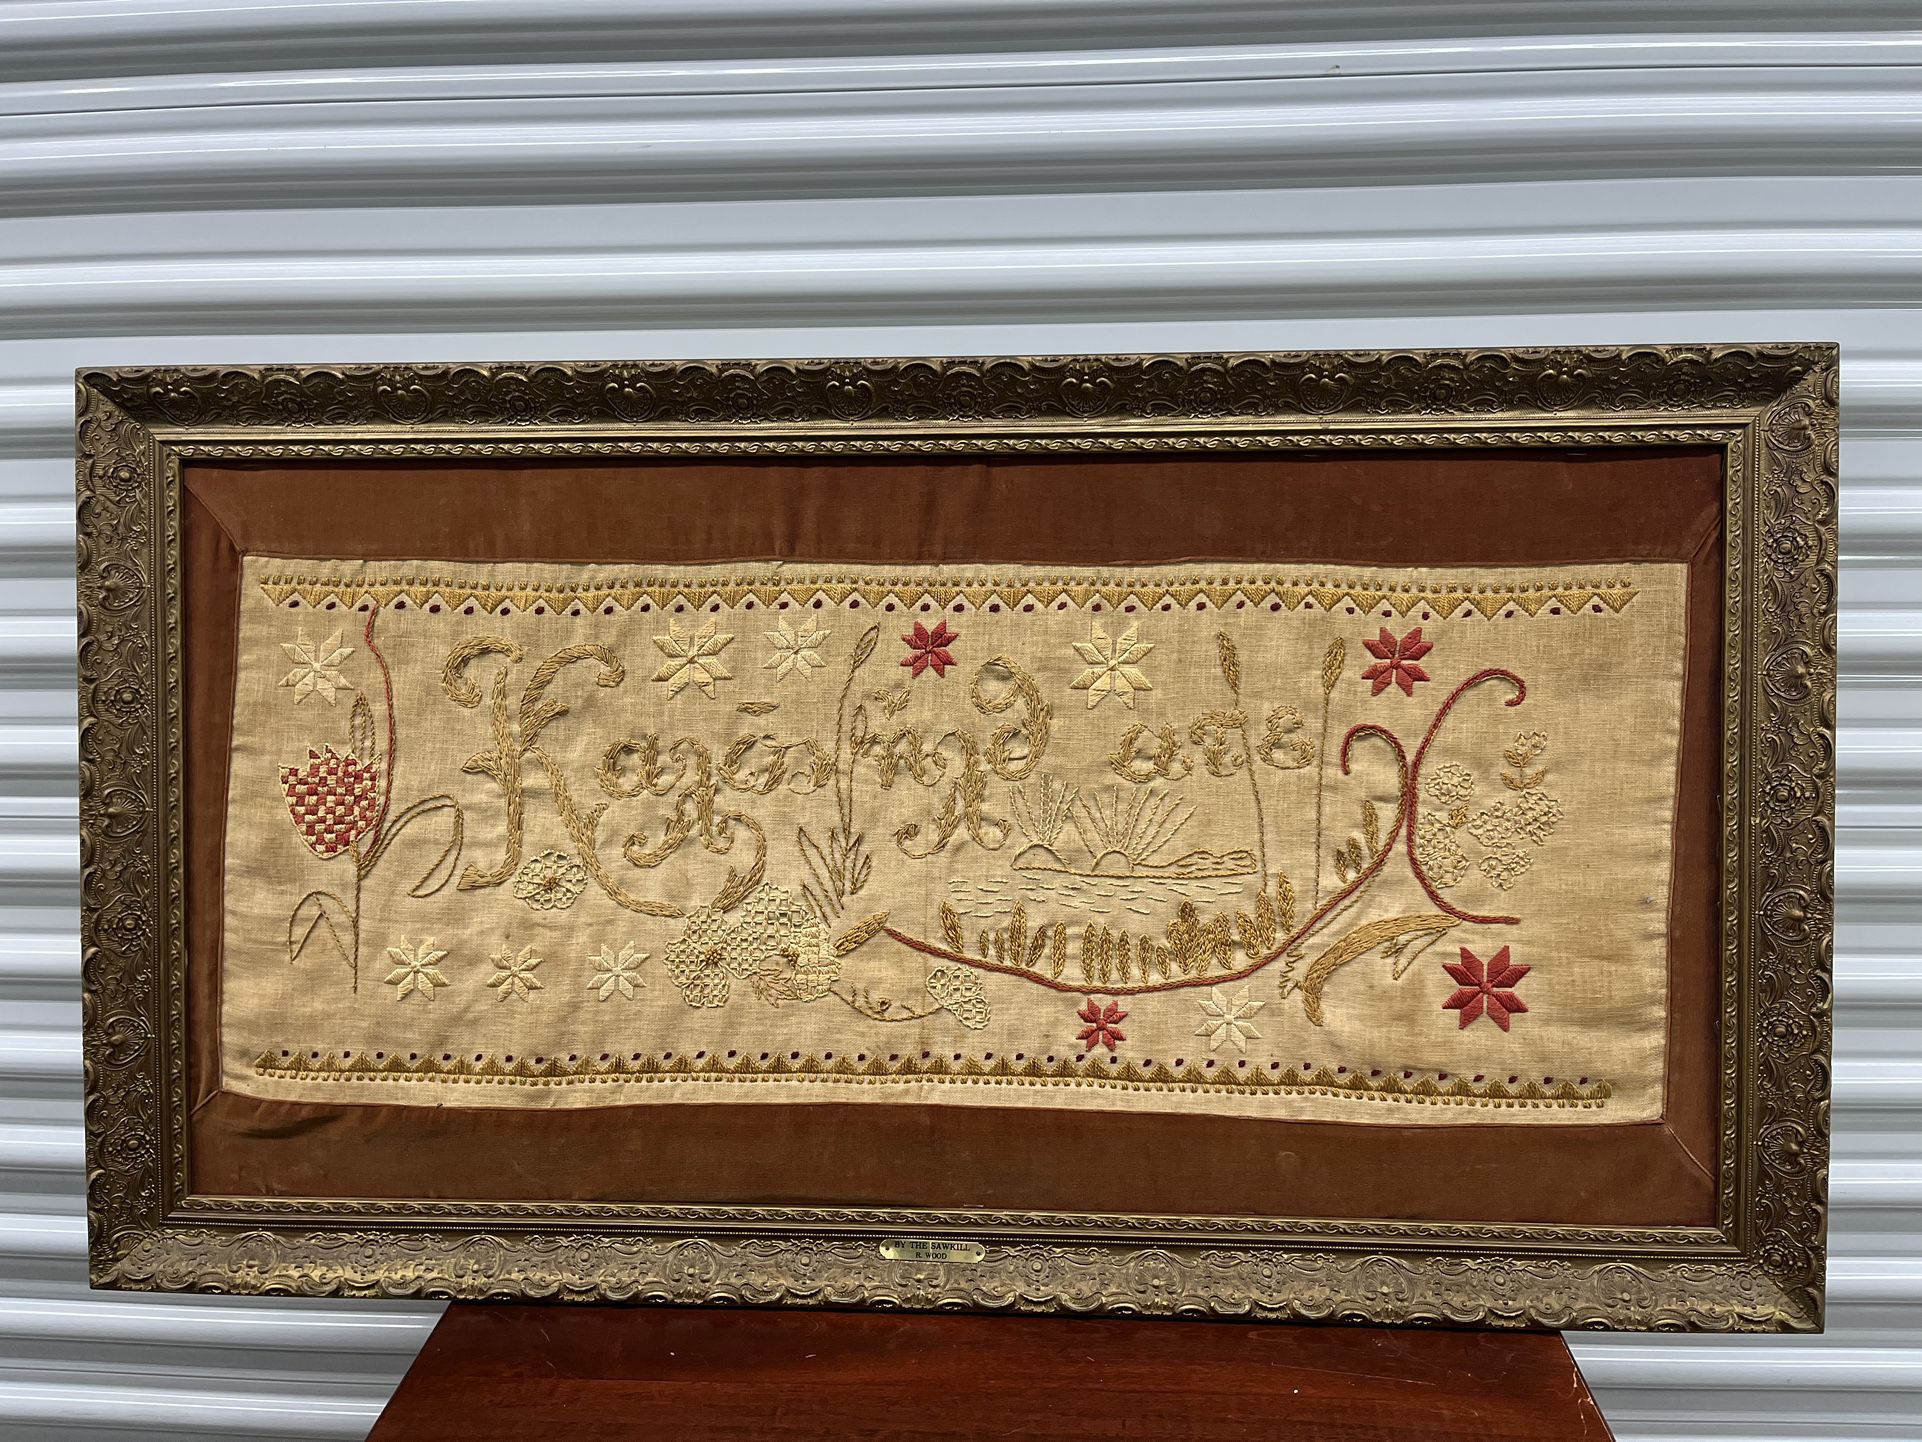 Unique Antique framed stitched art/tapestry 44 x 24